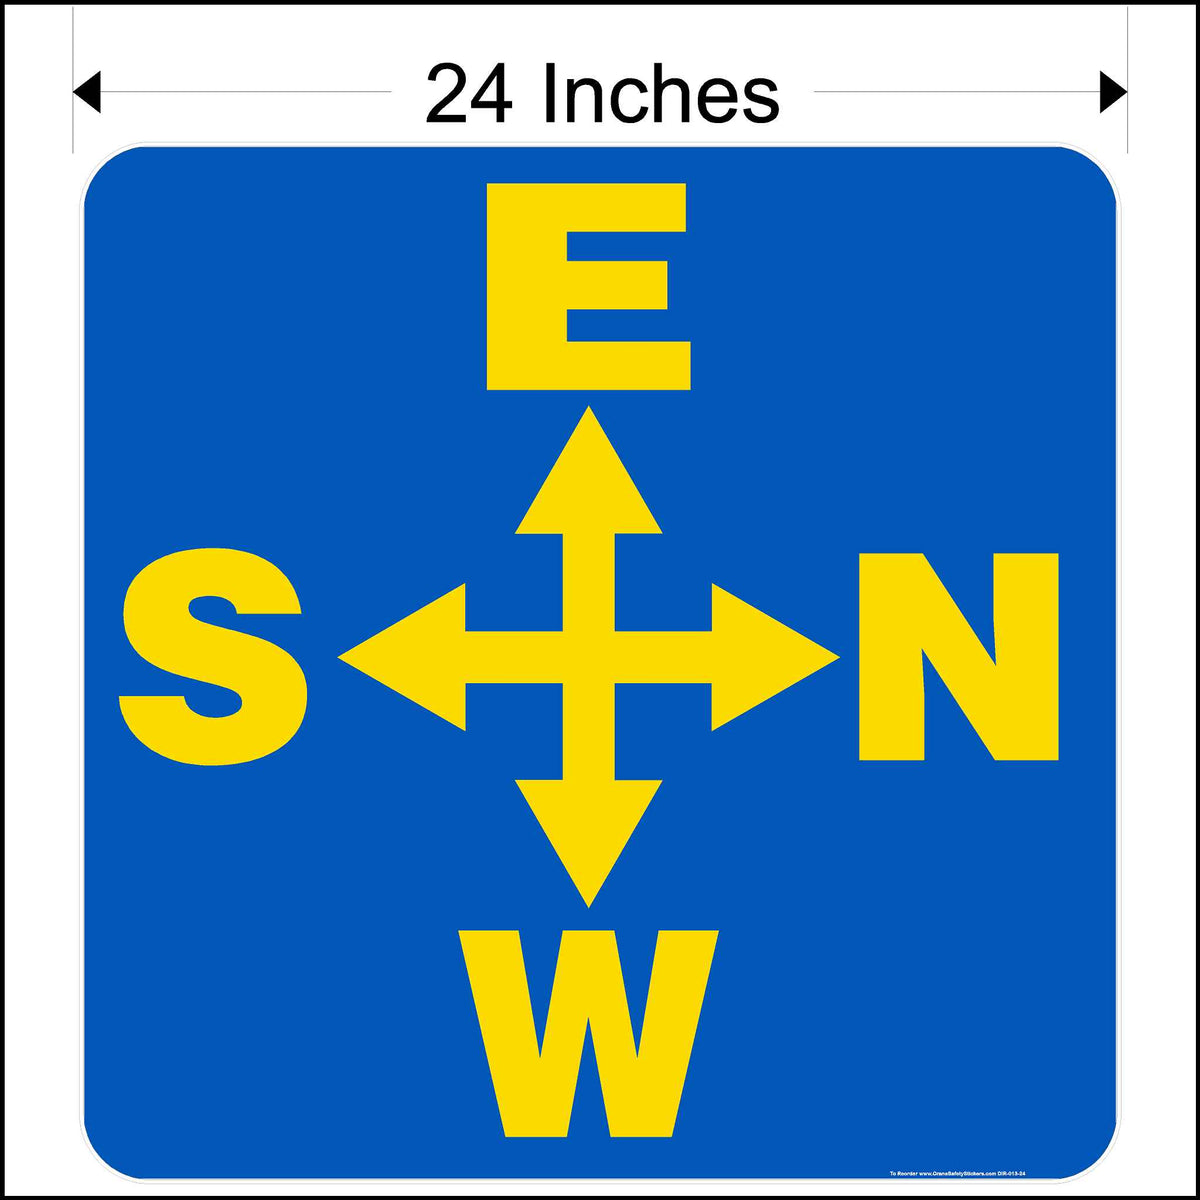 Overhead crane directional decal printed in blue and yellow measuring 24 inches square.